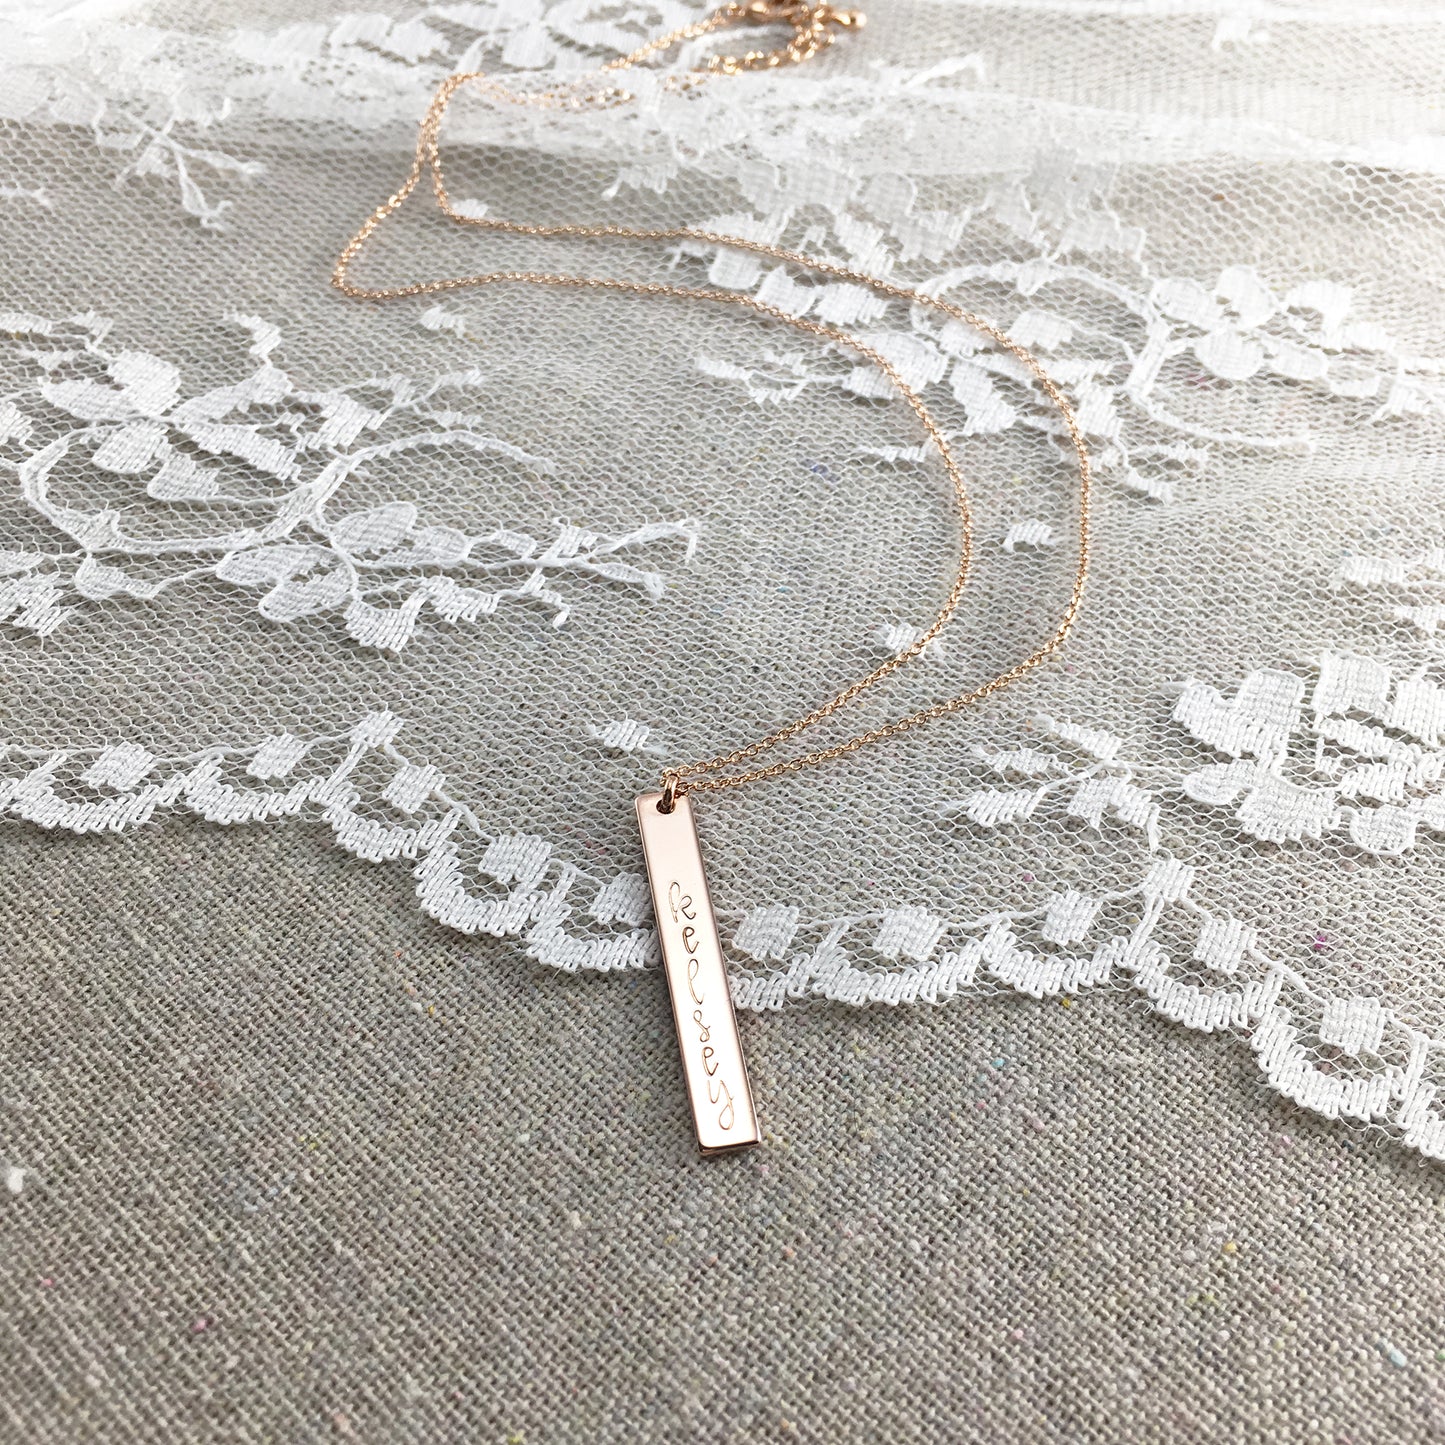 Rose Gold Vertical Bar Name Necklace Heatherly Jewelry